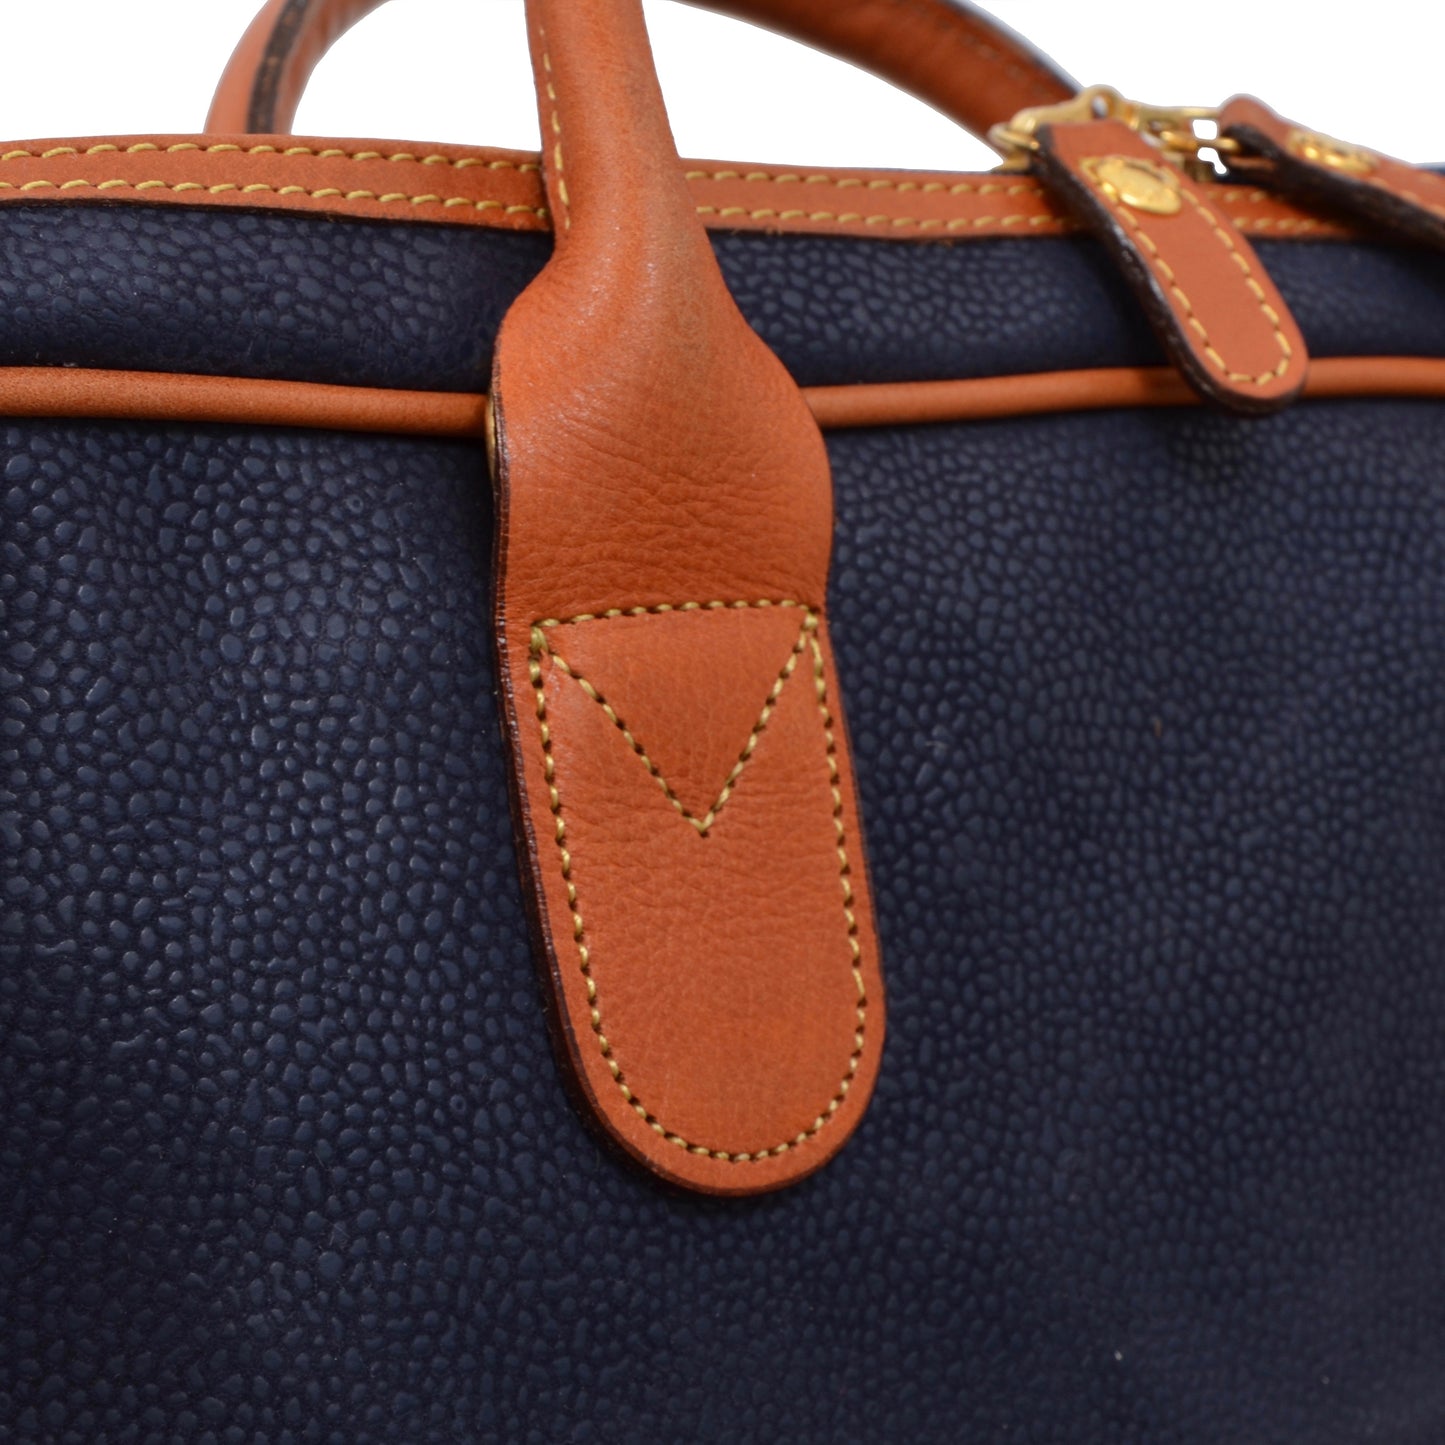 Bric's Soft-Sided Briefcase - Blue